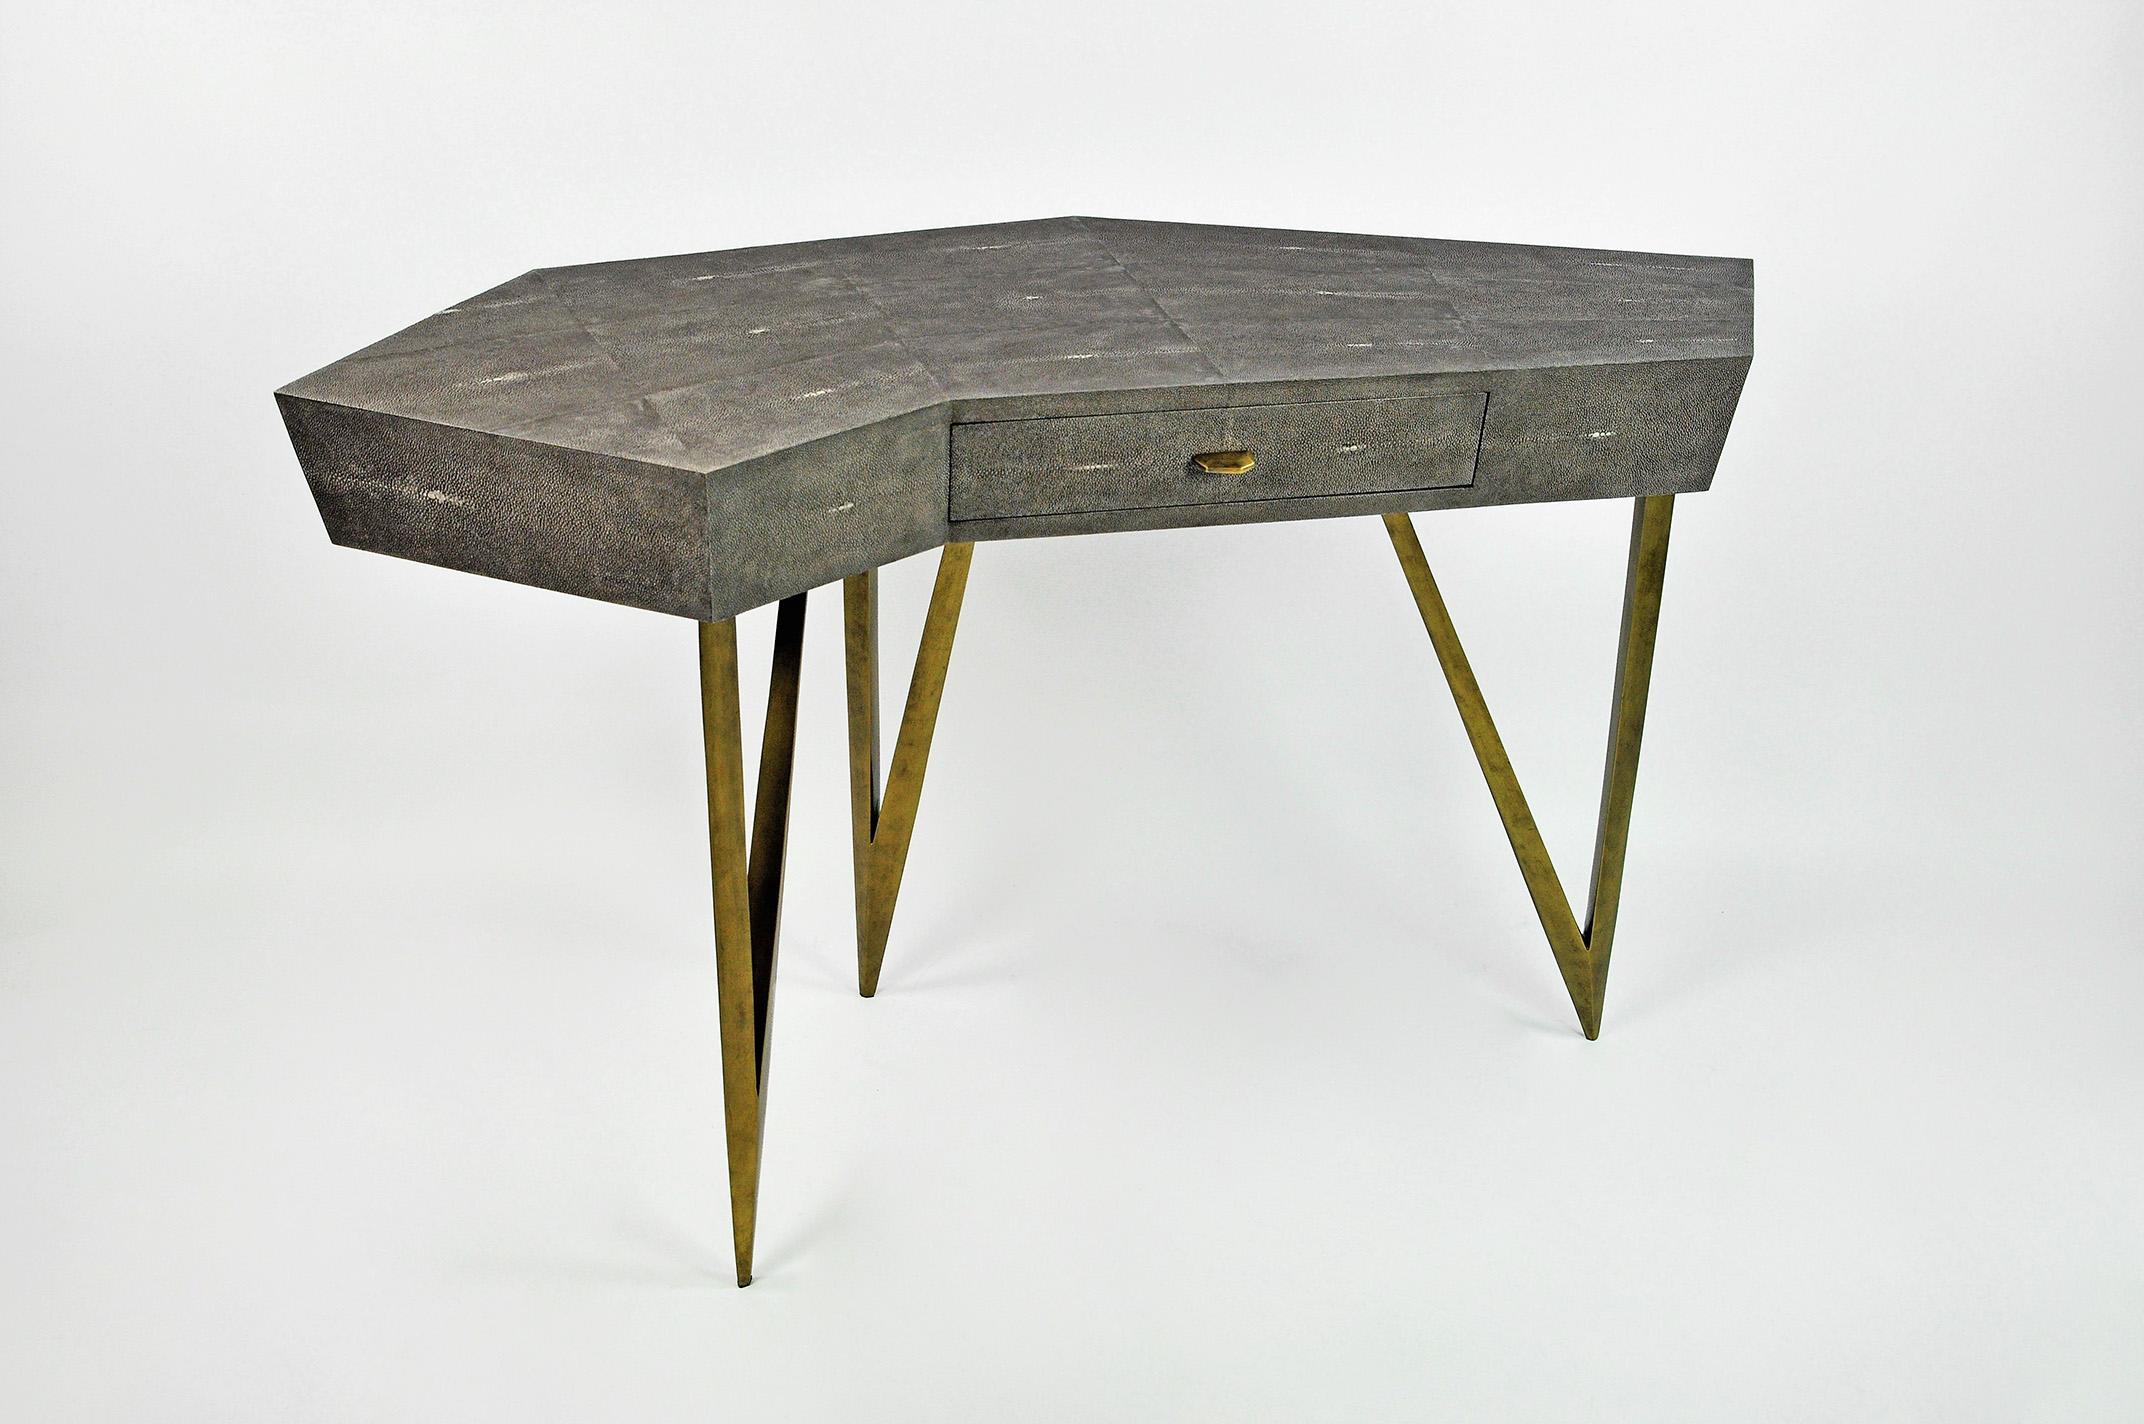 This futurist desk is made of original shagreen.
It has 1 central drawer with a brass knob.
The triangular legs are in metal with an antique brass patina.

It can be used as a writing desk or as a vanity table in a bedroom.

The dimensions of the